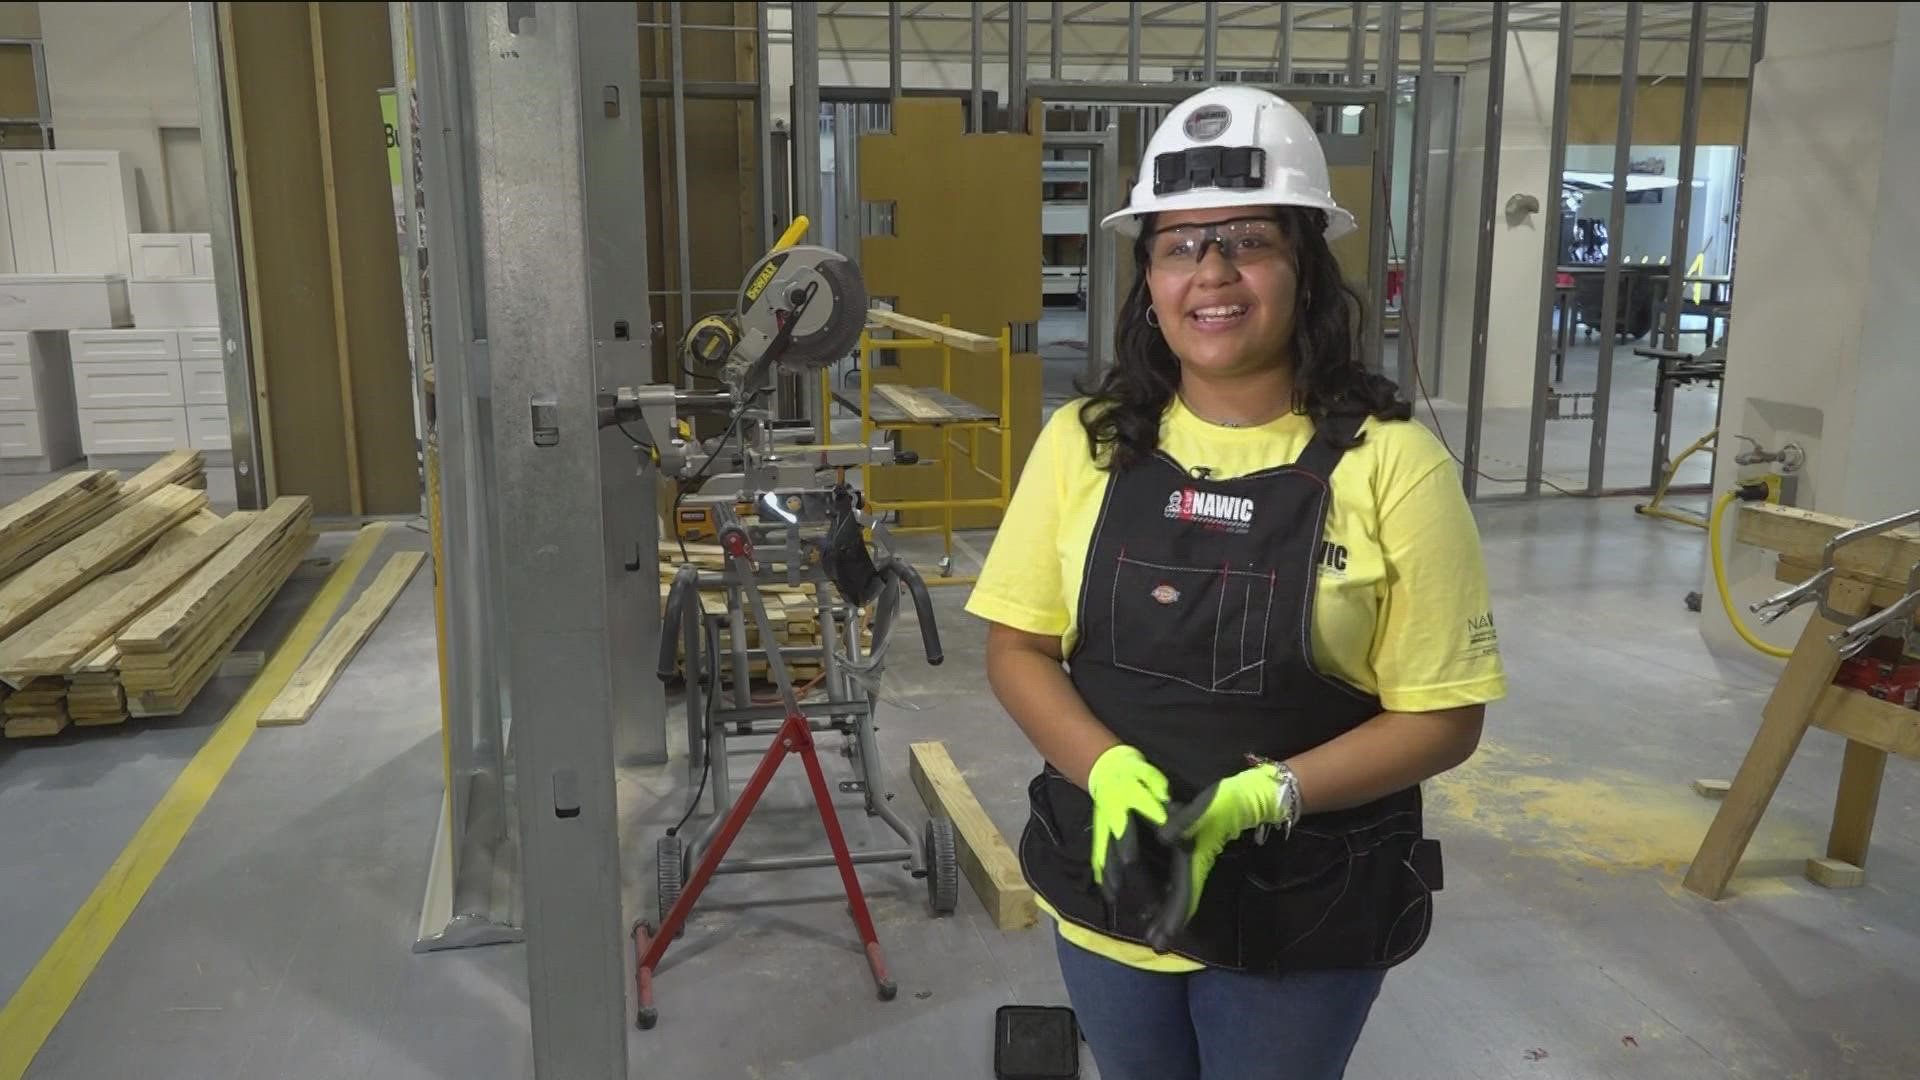 One industry that's booming in Austin as the city grows is construction. One summer camp is empowering girls to fill the need for workers.